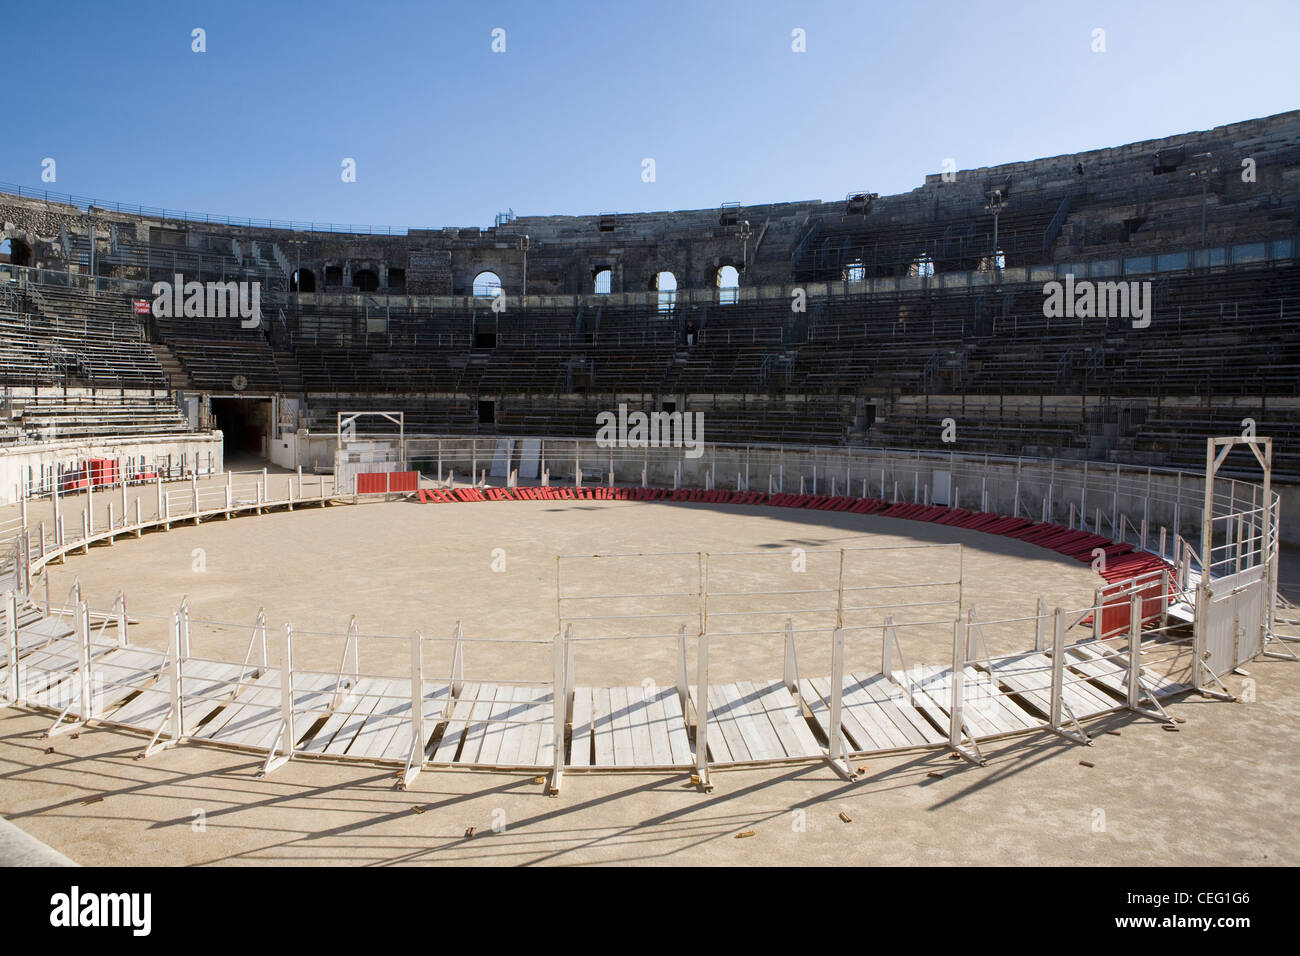 Nimes Arena, Roman Arena in the centre of Nimes, France Stock Photo